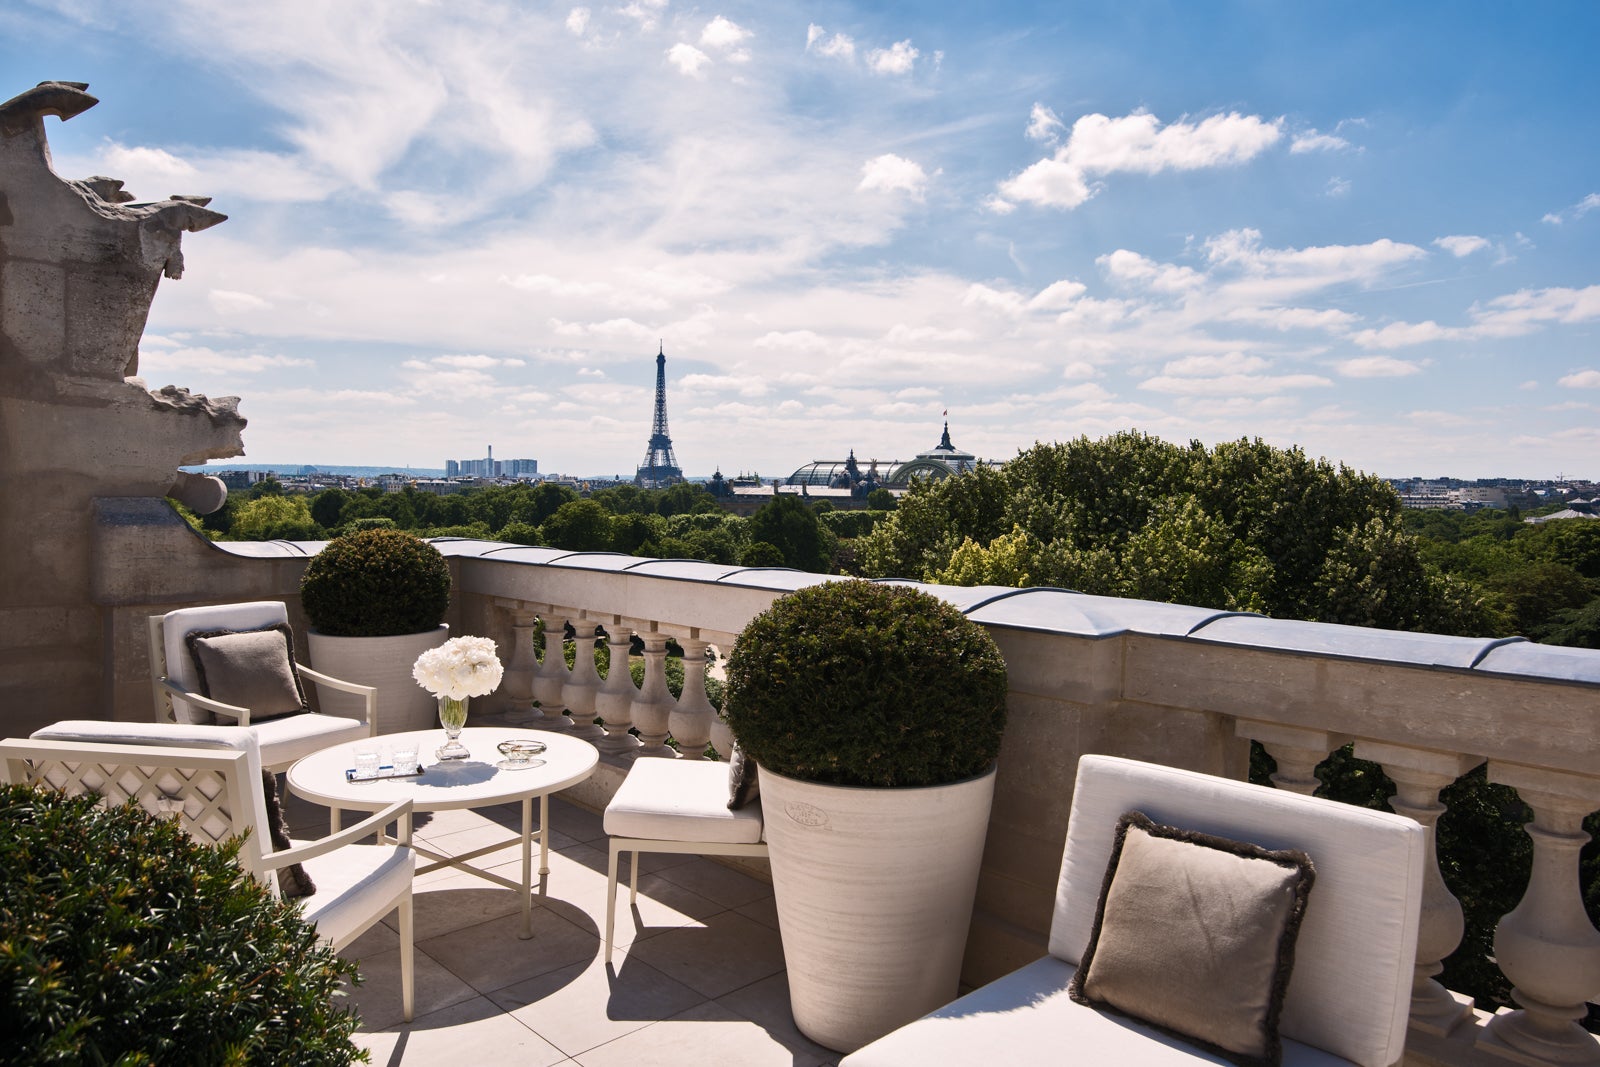 Paris is still the luxury capital of the world, Economy and Business